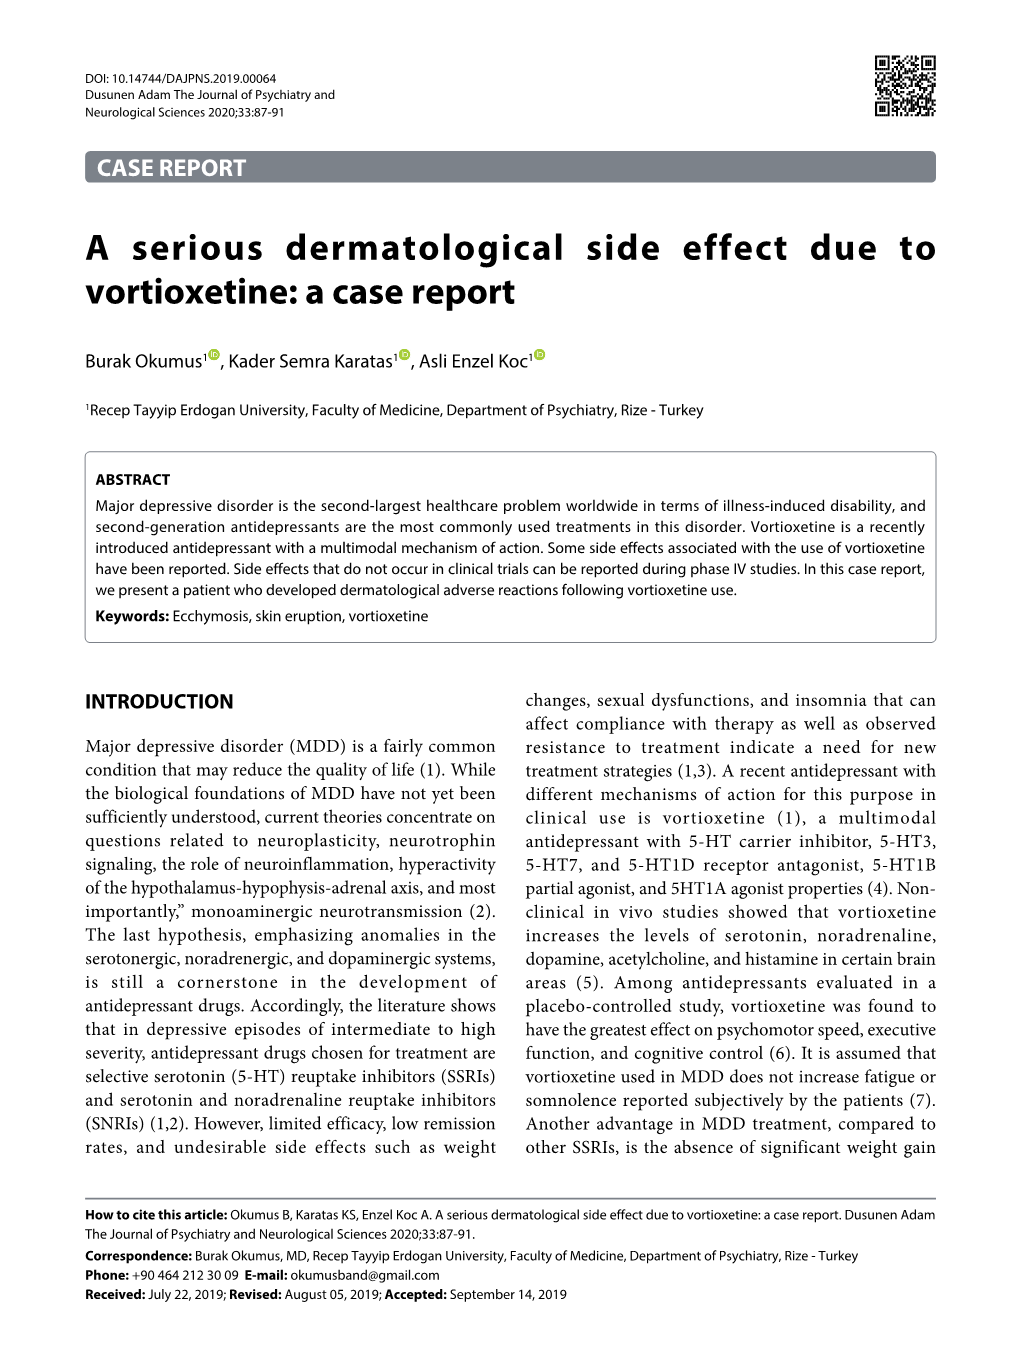 A Serious Dermatological Side Effect Due to Vortioxetine: a Case Report